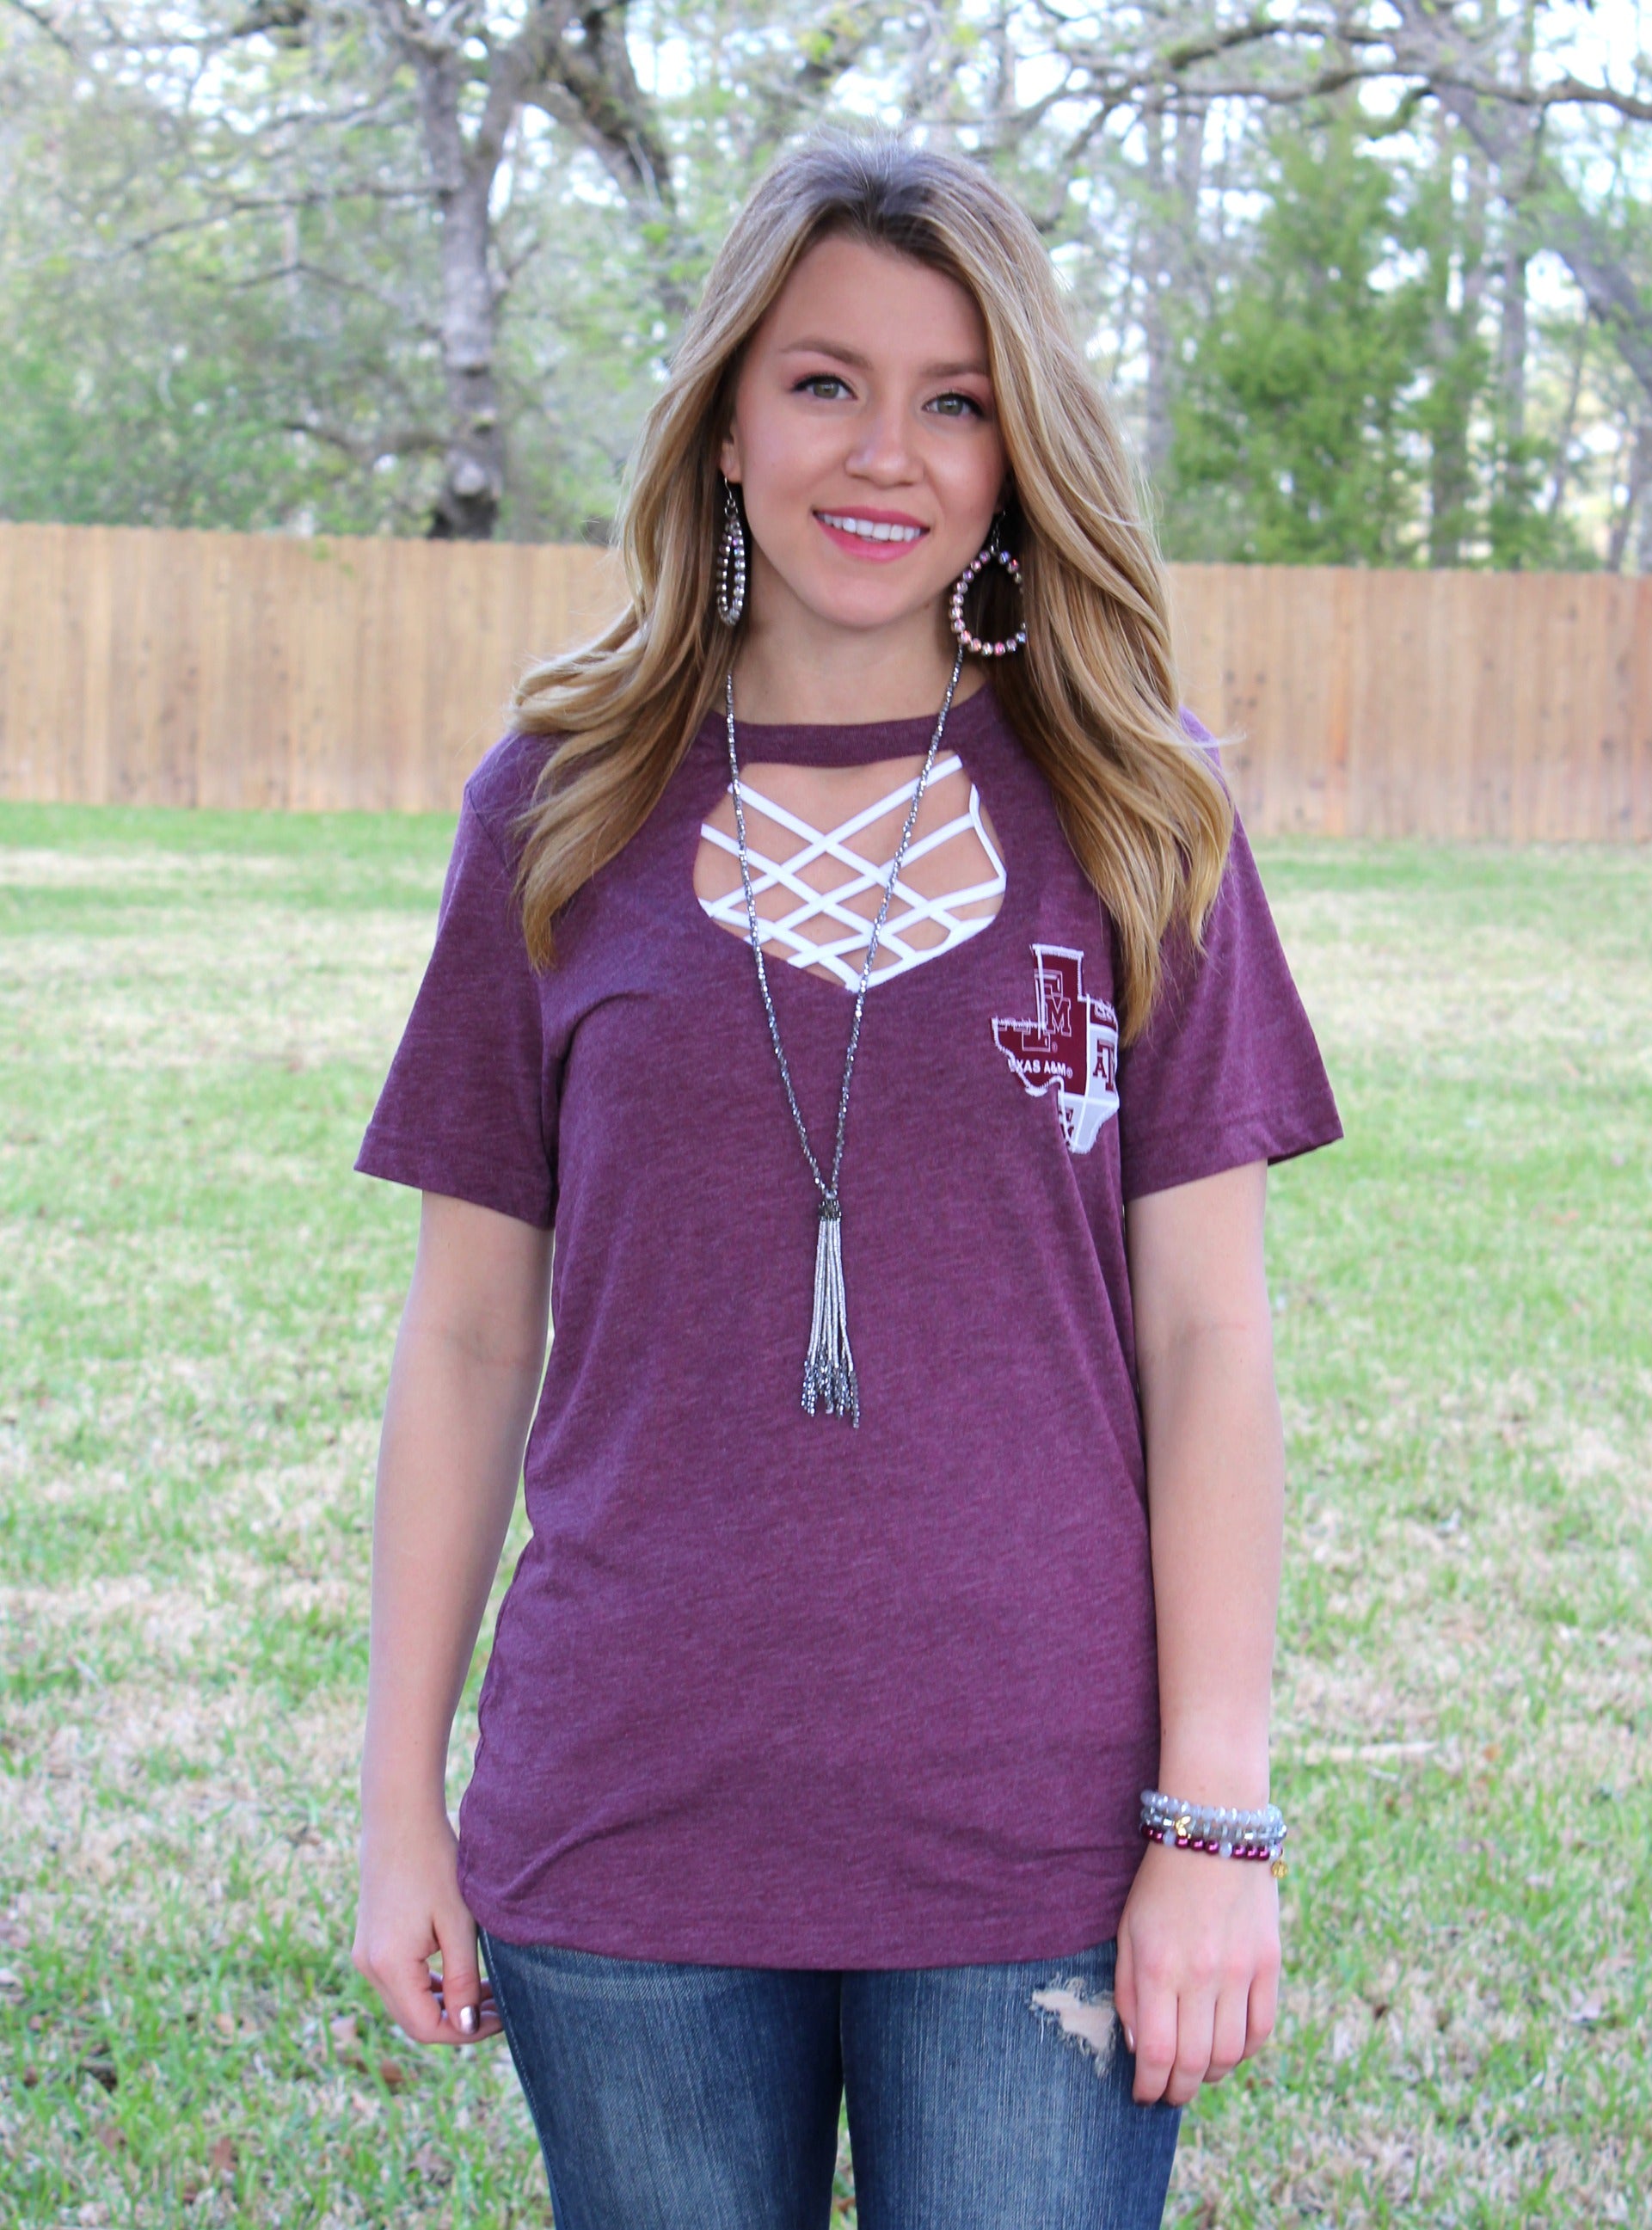 Gameday Couture Shirts | GameDay Aggie Tee Shirts | Game Day Couture Texas